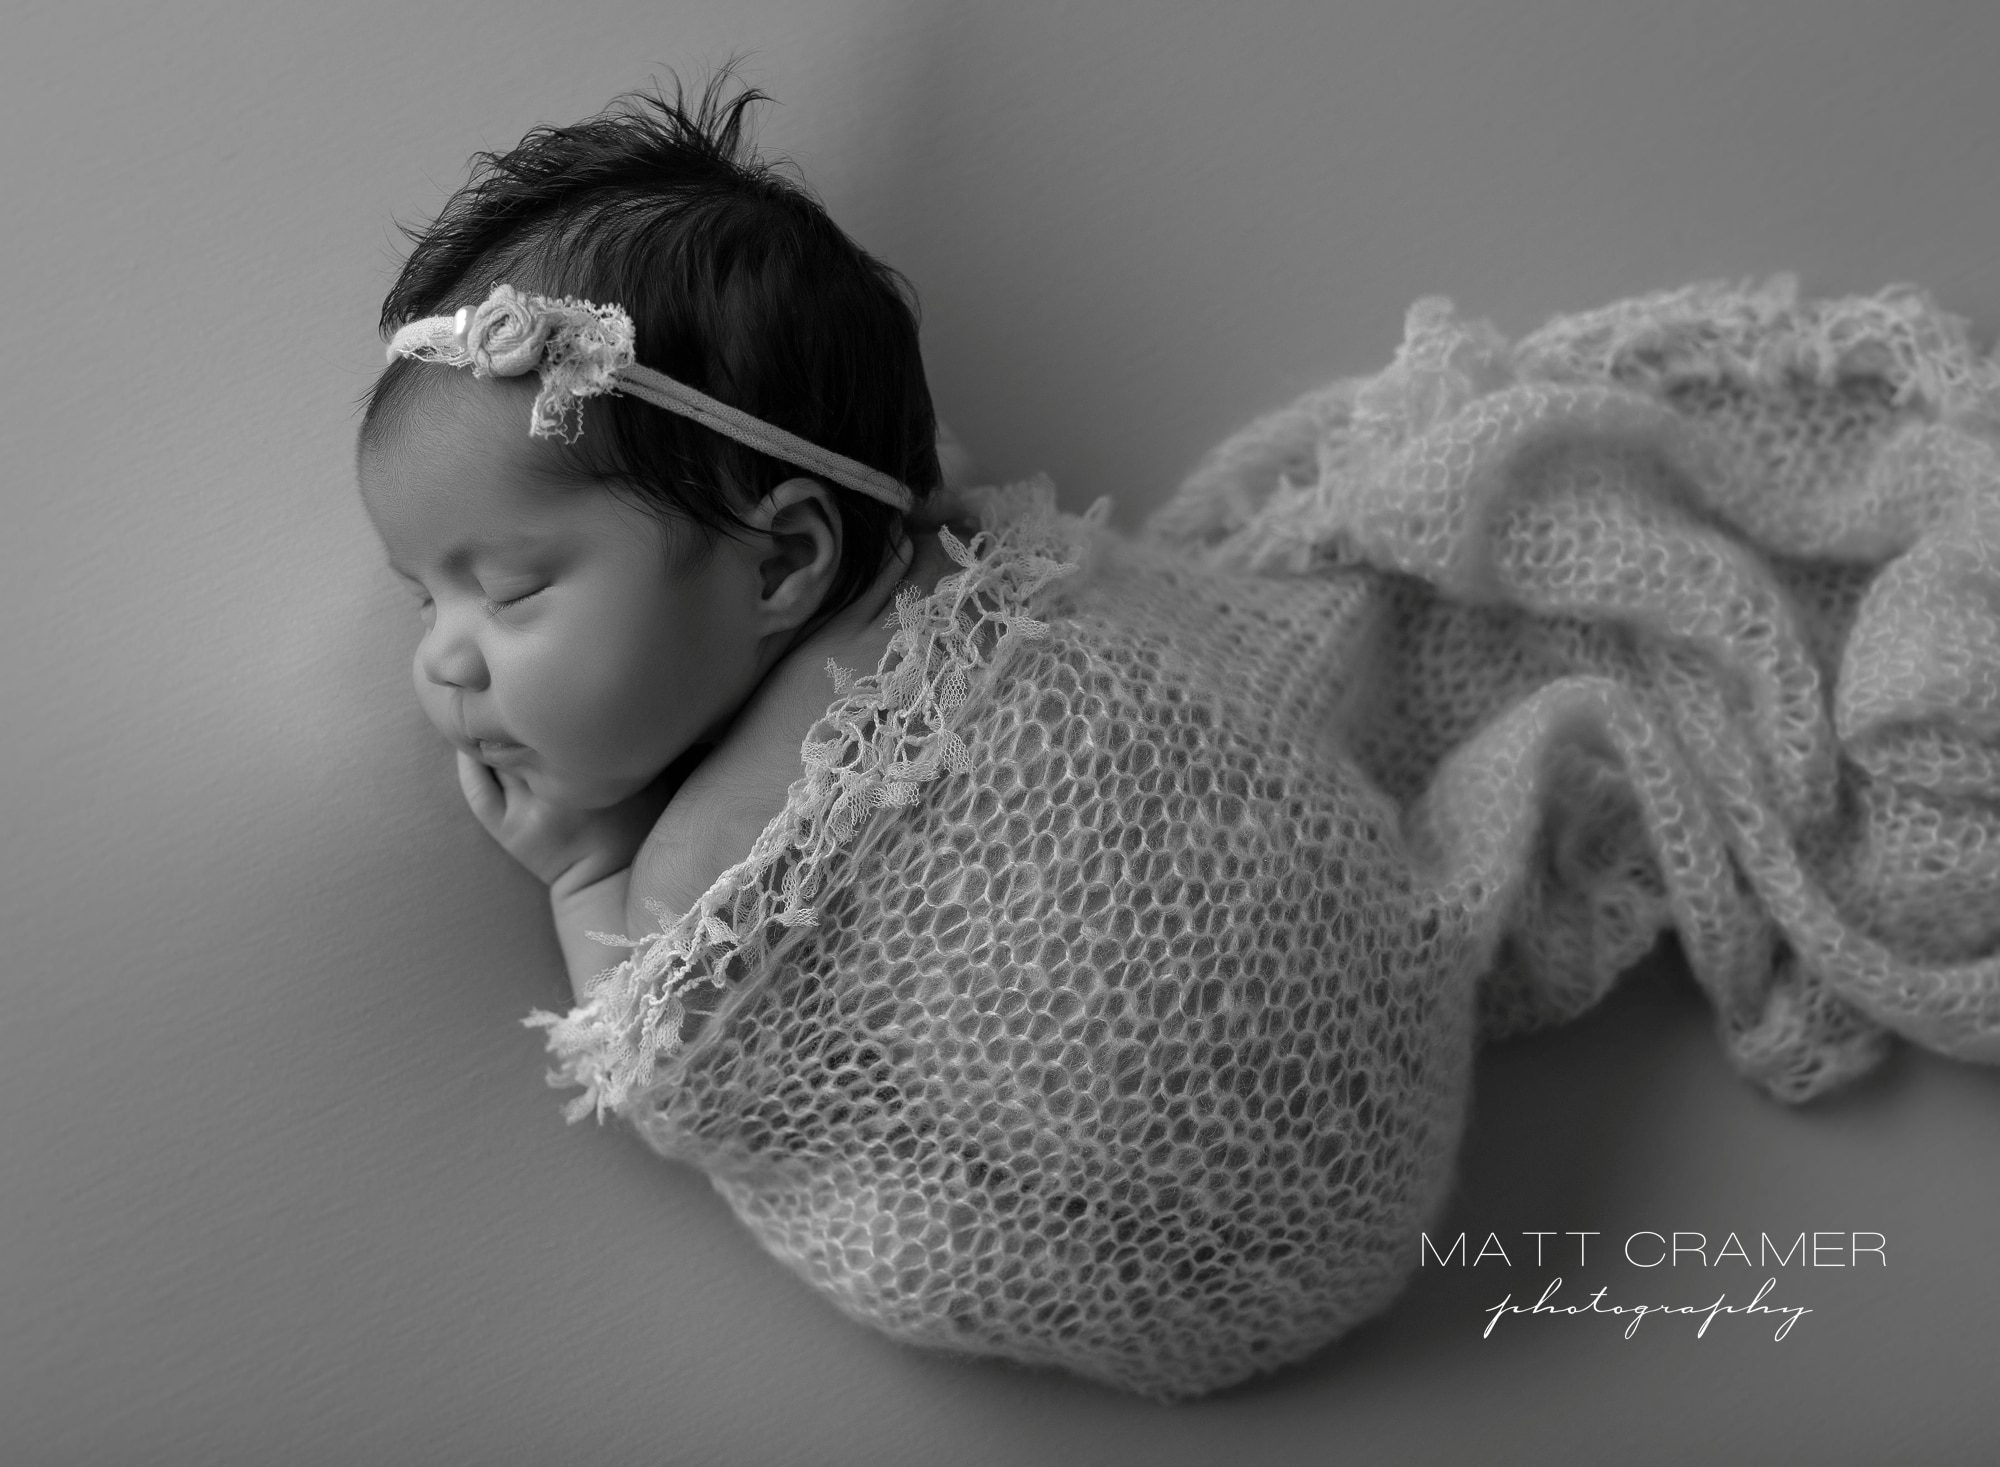 black and white aerial shot of curled up sleeping newborn baby on smooth fabric